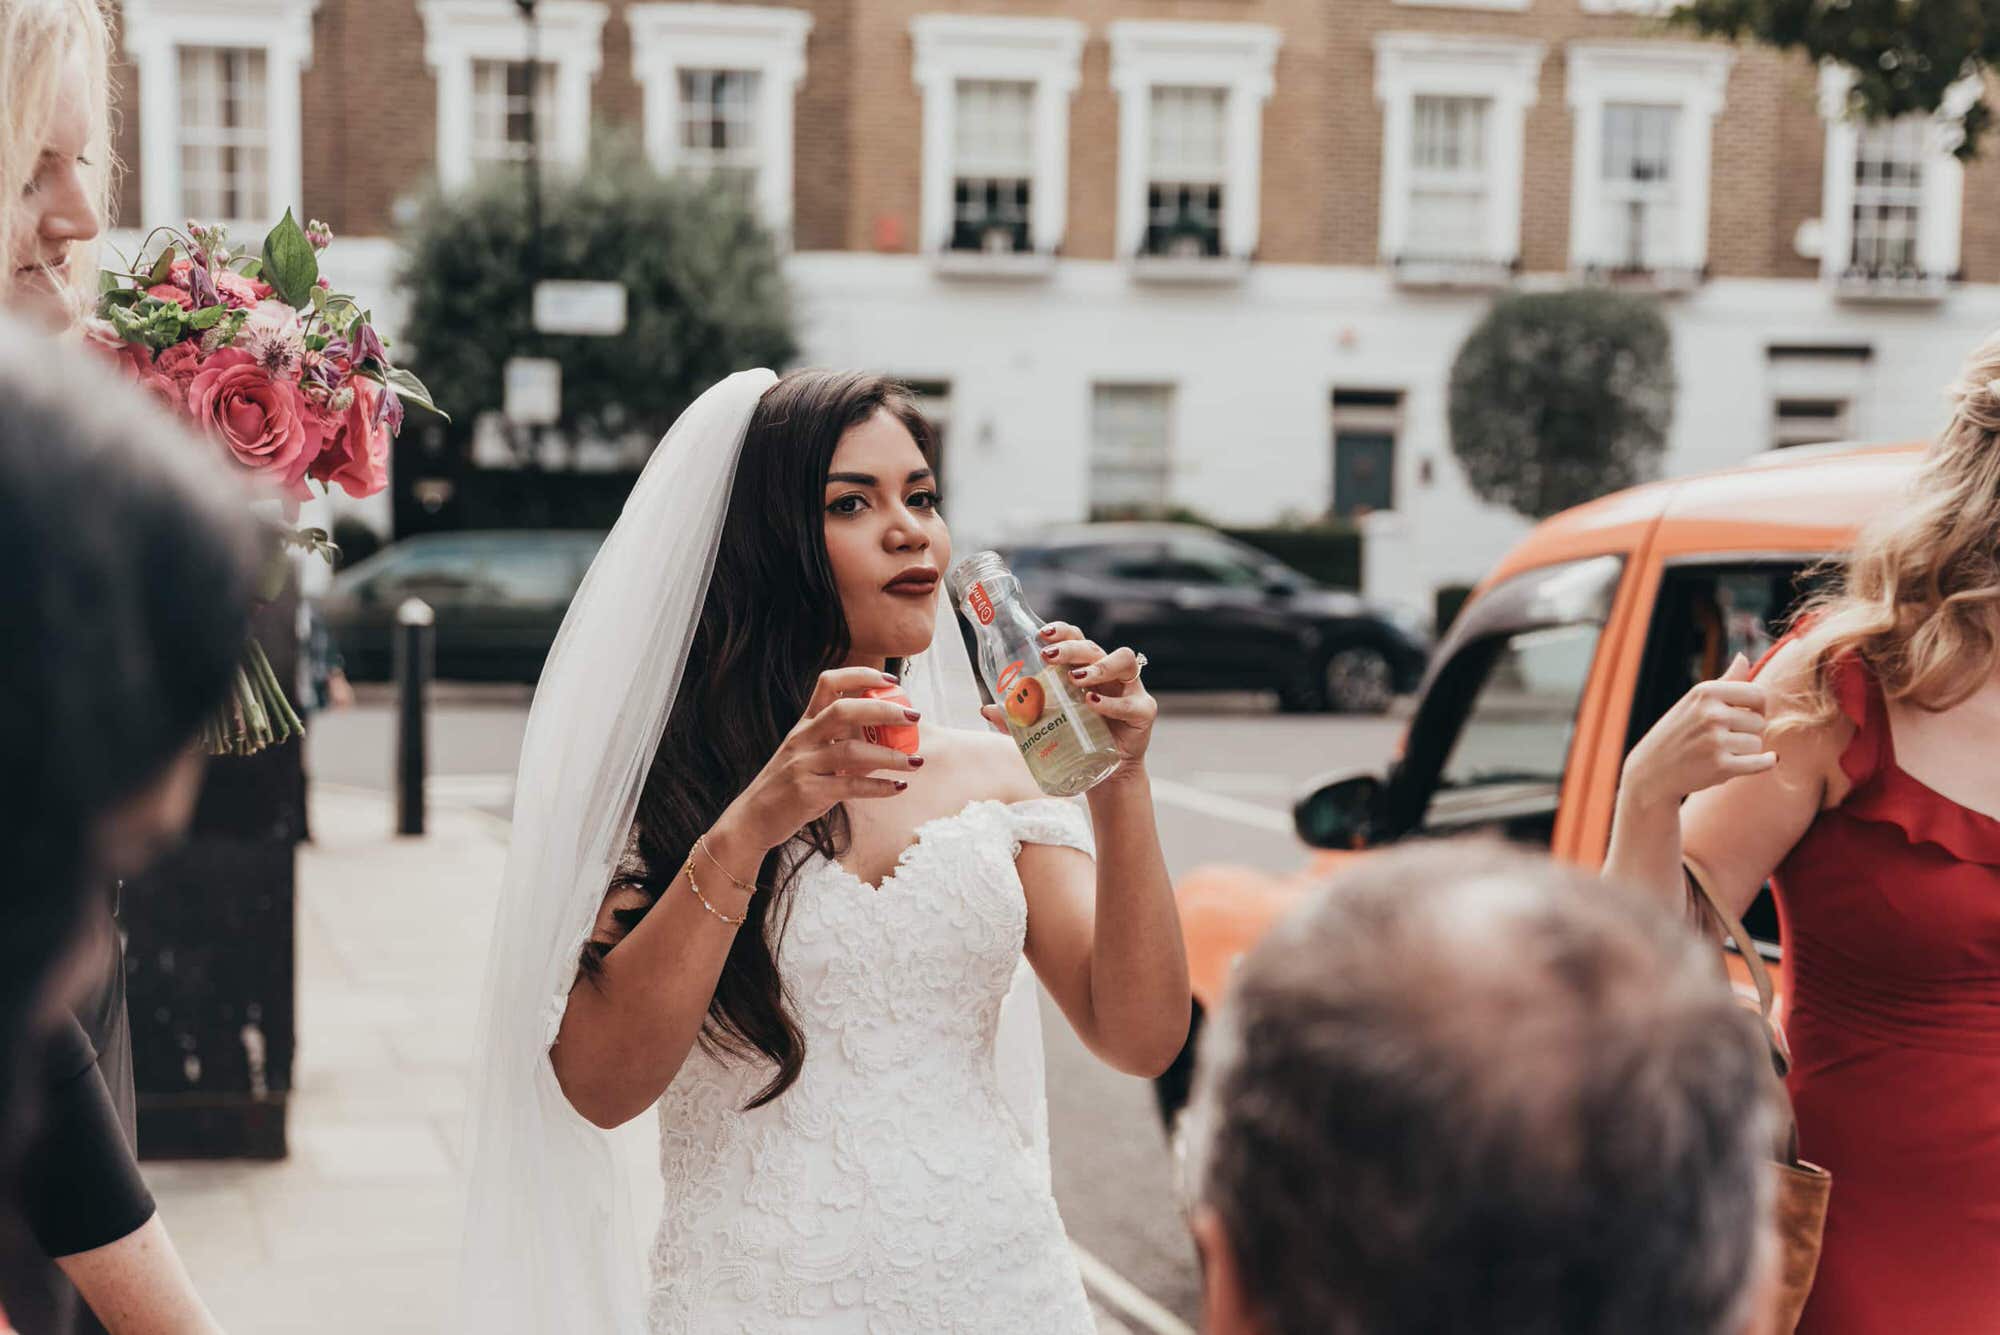 bride-drinking-before-fusion-wedding-ceremony-in-london-roshni-photography